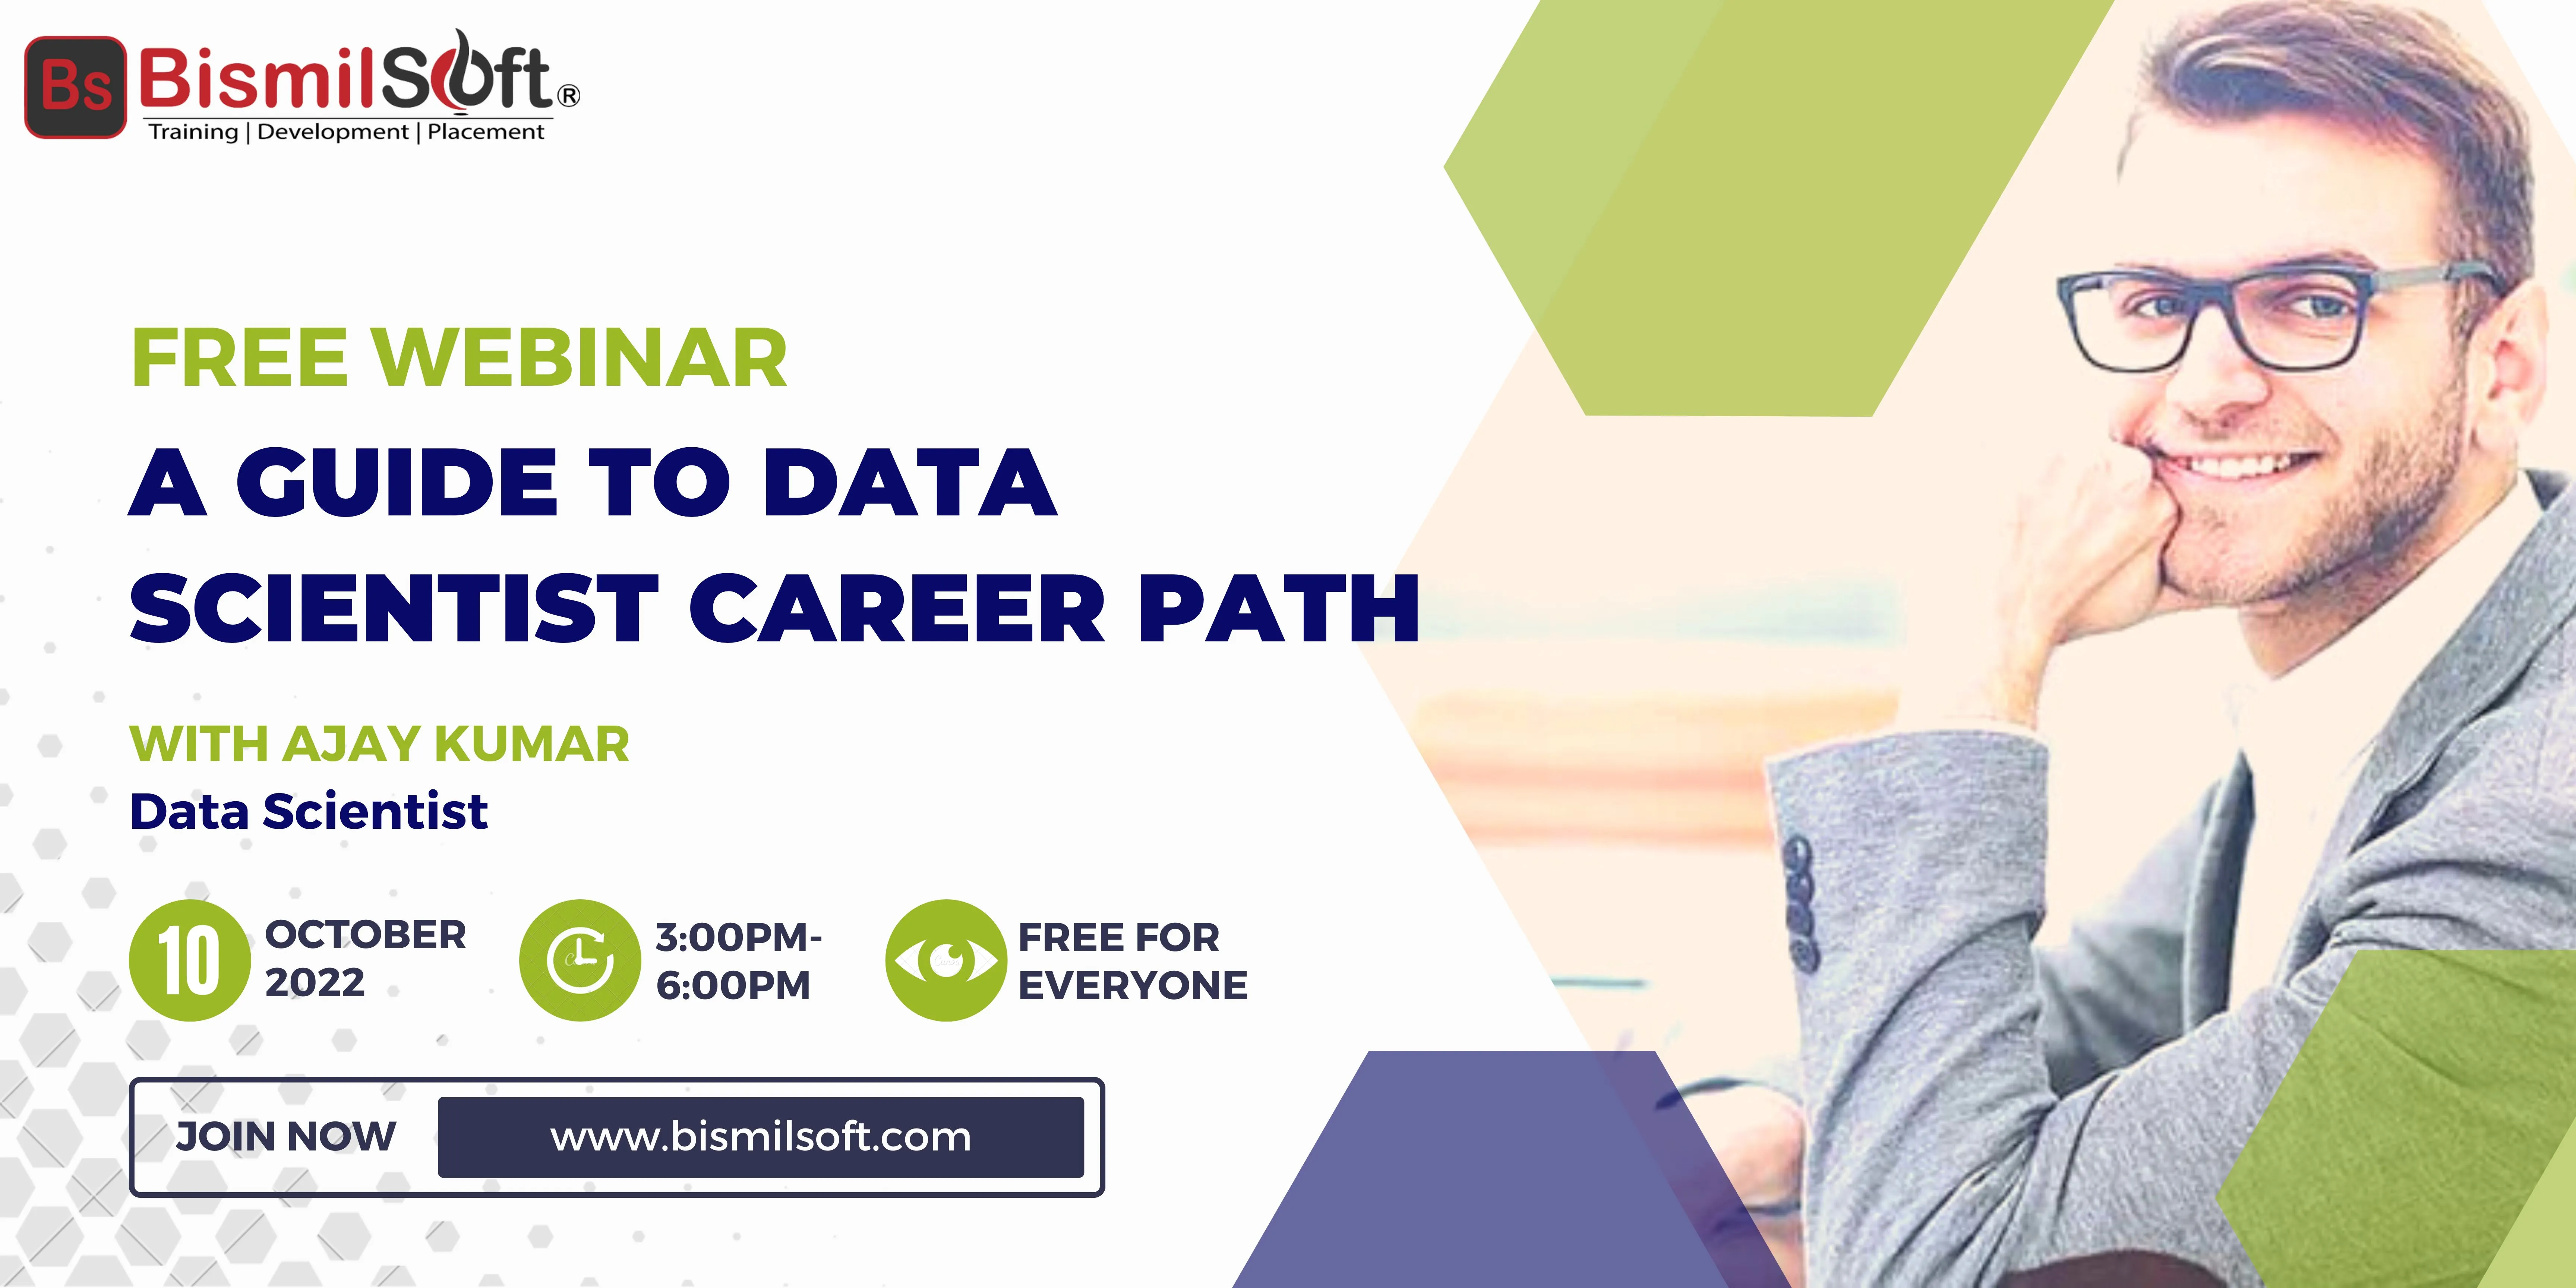 A Guide to Data Scientist Career Path